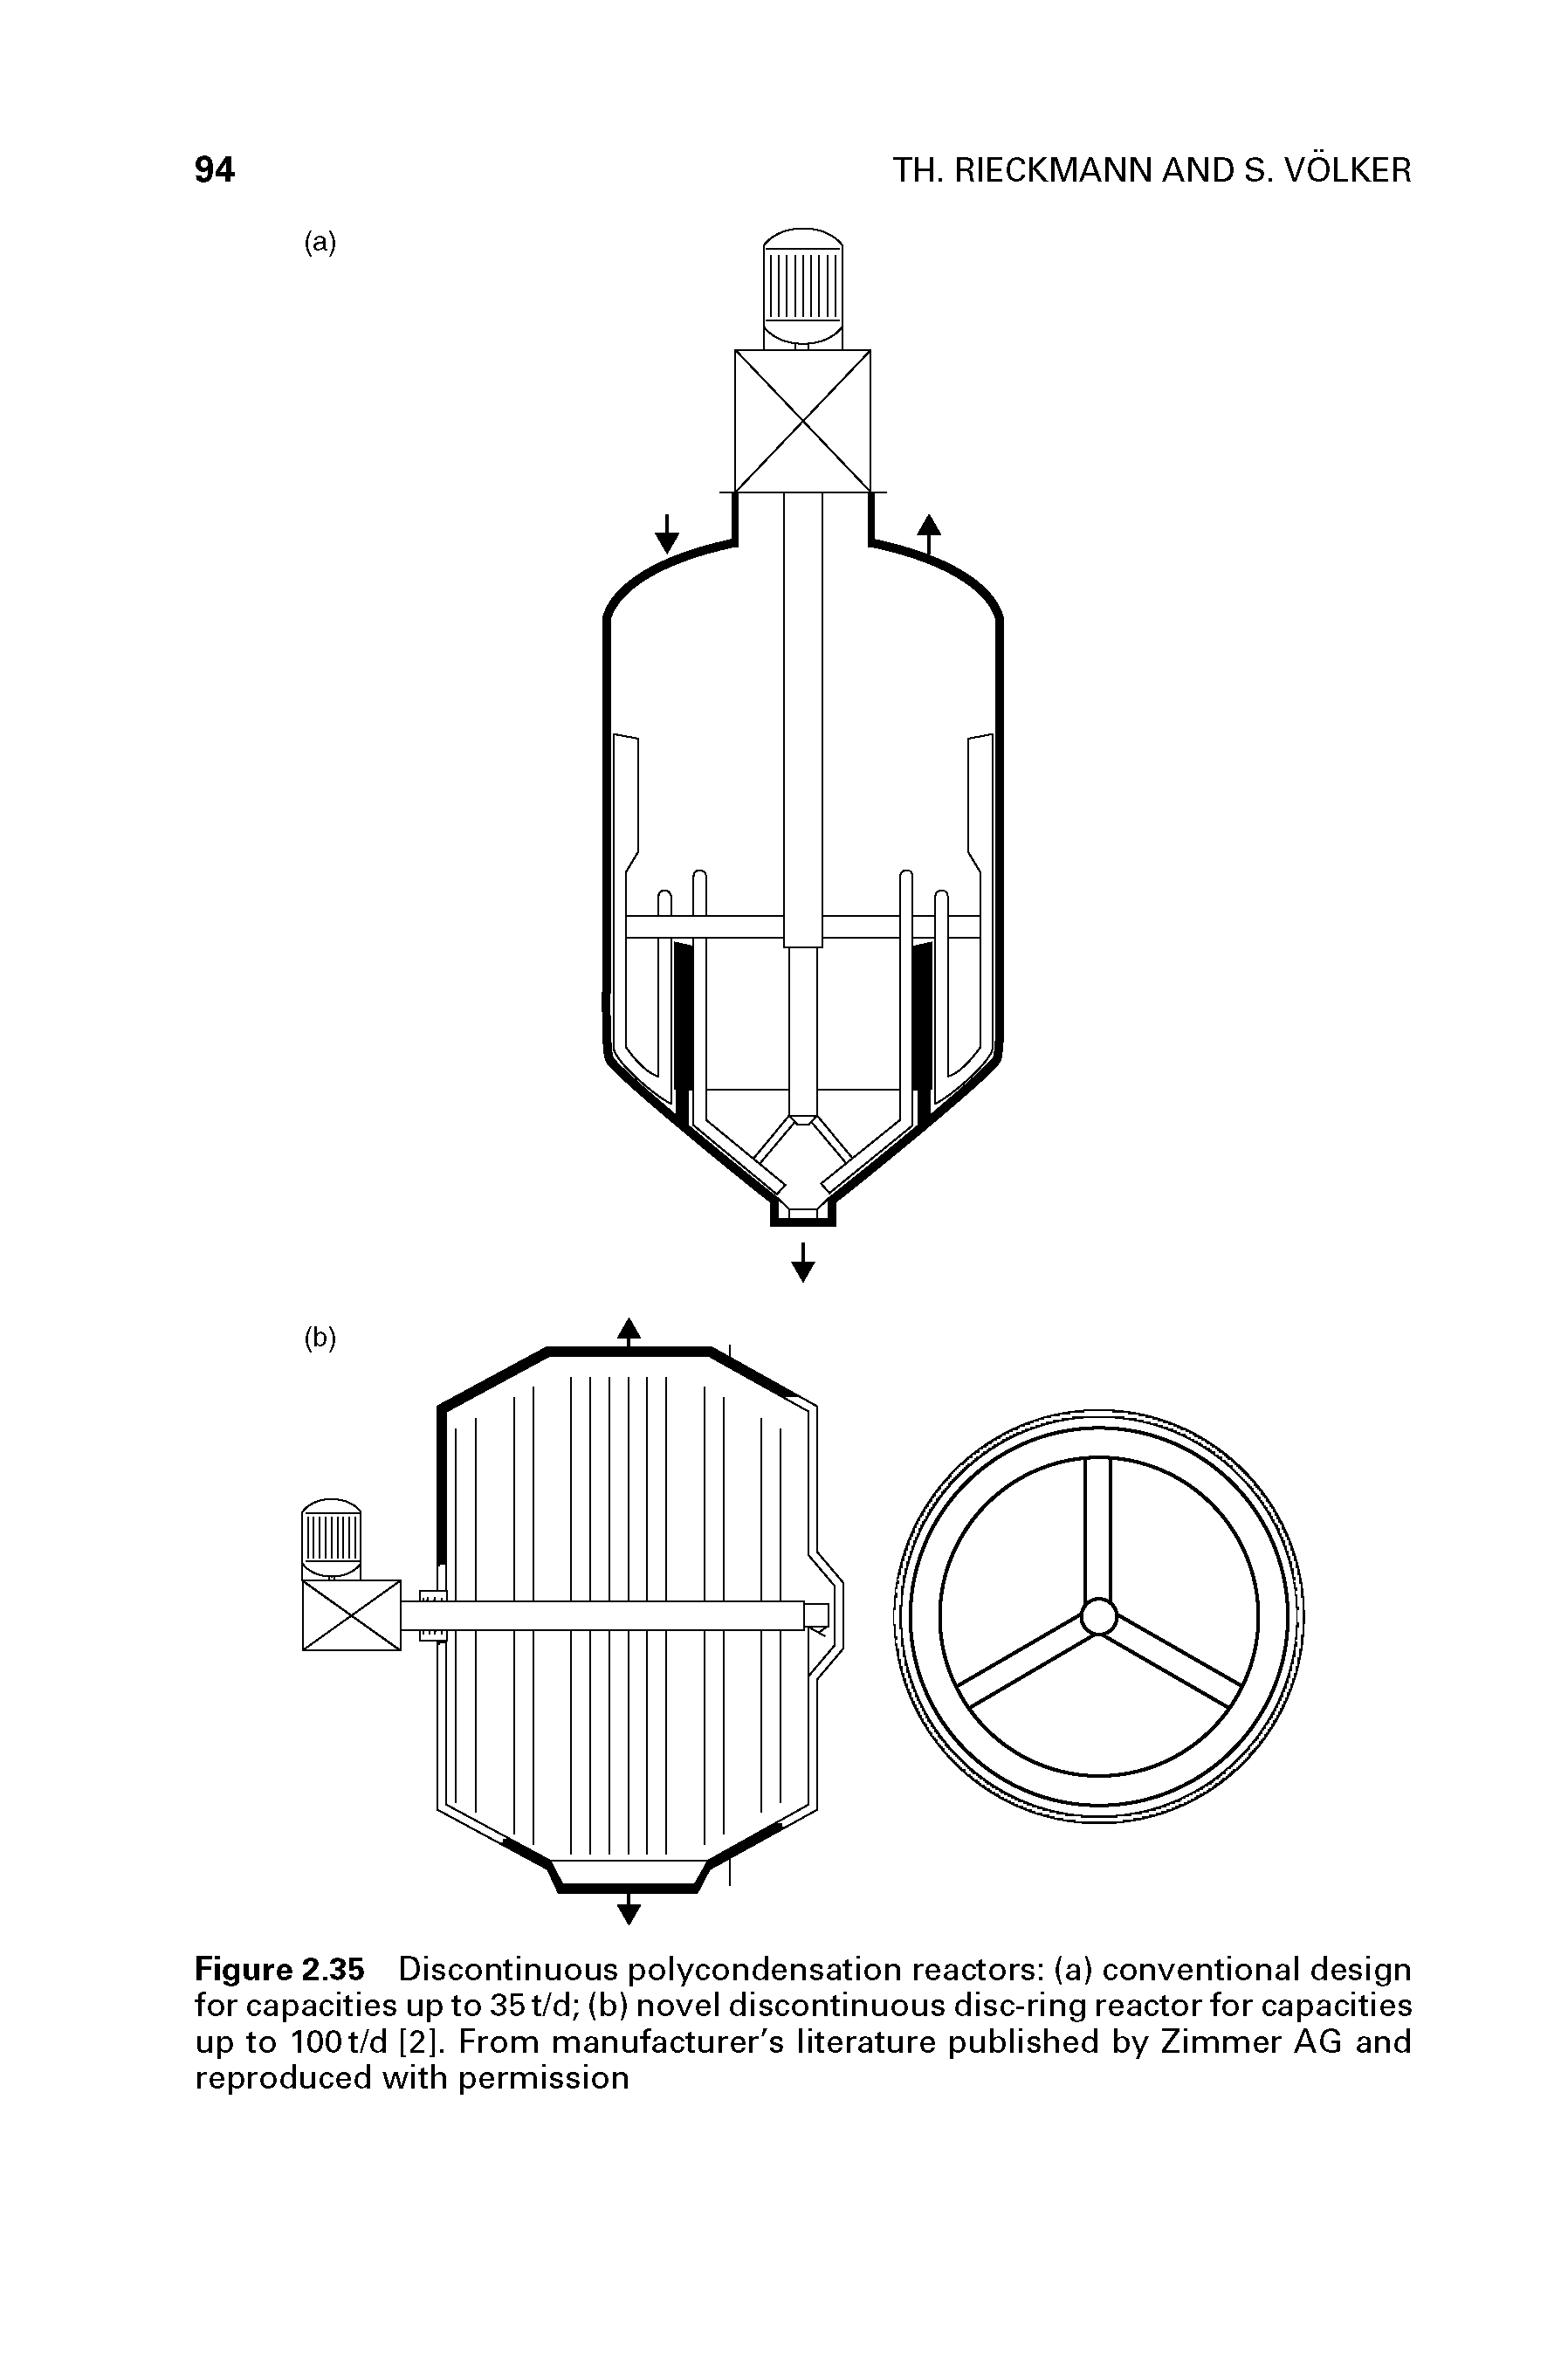 Figure 2.35 Discontinuous polycondensation reactors (a) conventional design for capacities up to 35t/d (b) novel discontinuous disc-ring reactor for capacities up to 100t/d [2]. From manufacturer s literature published by Zimmer AG and reproduced with permission...